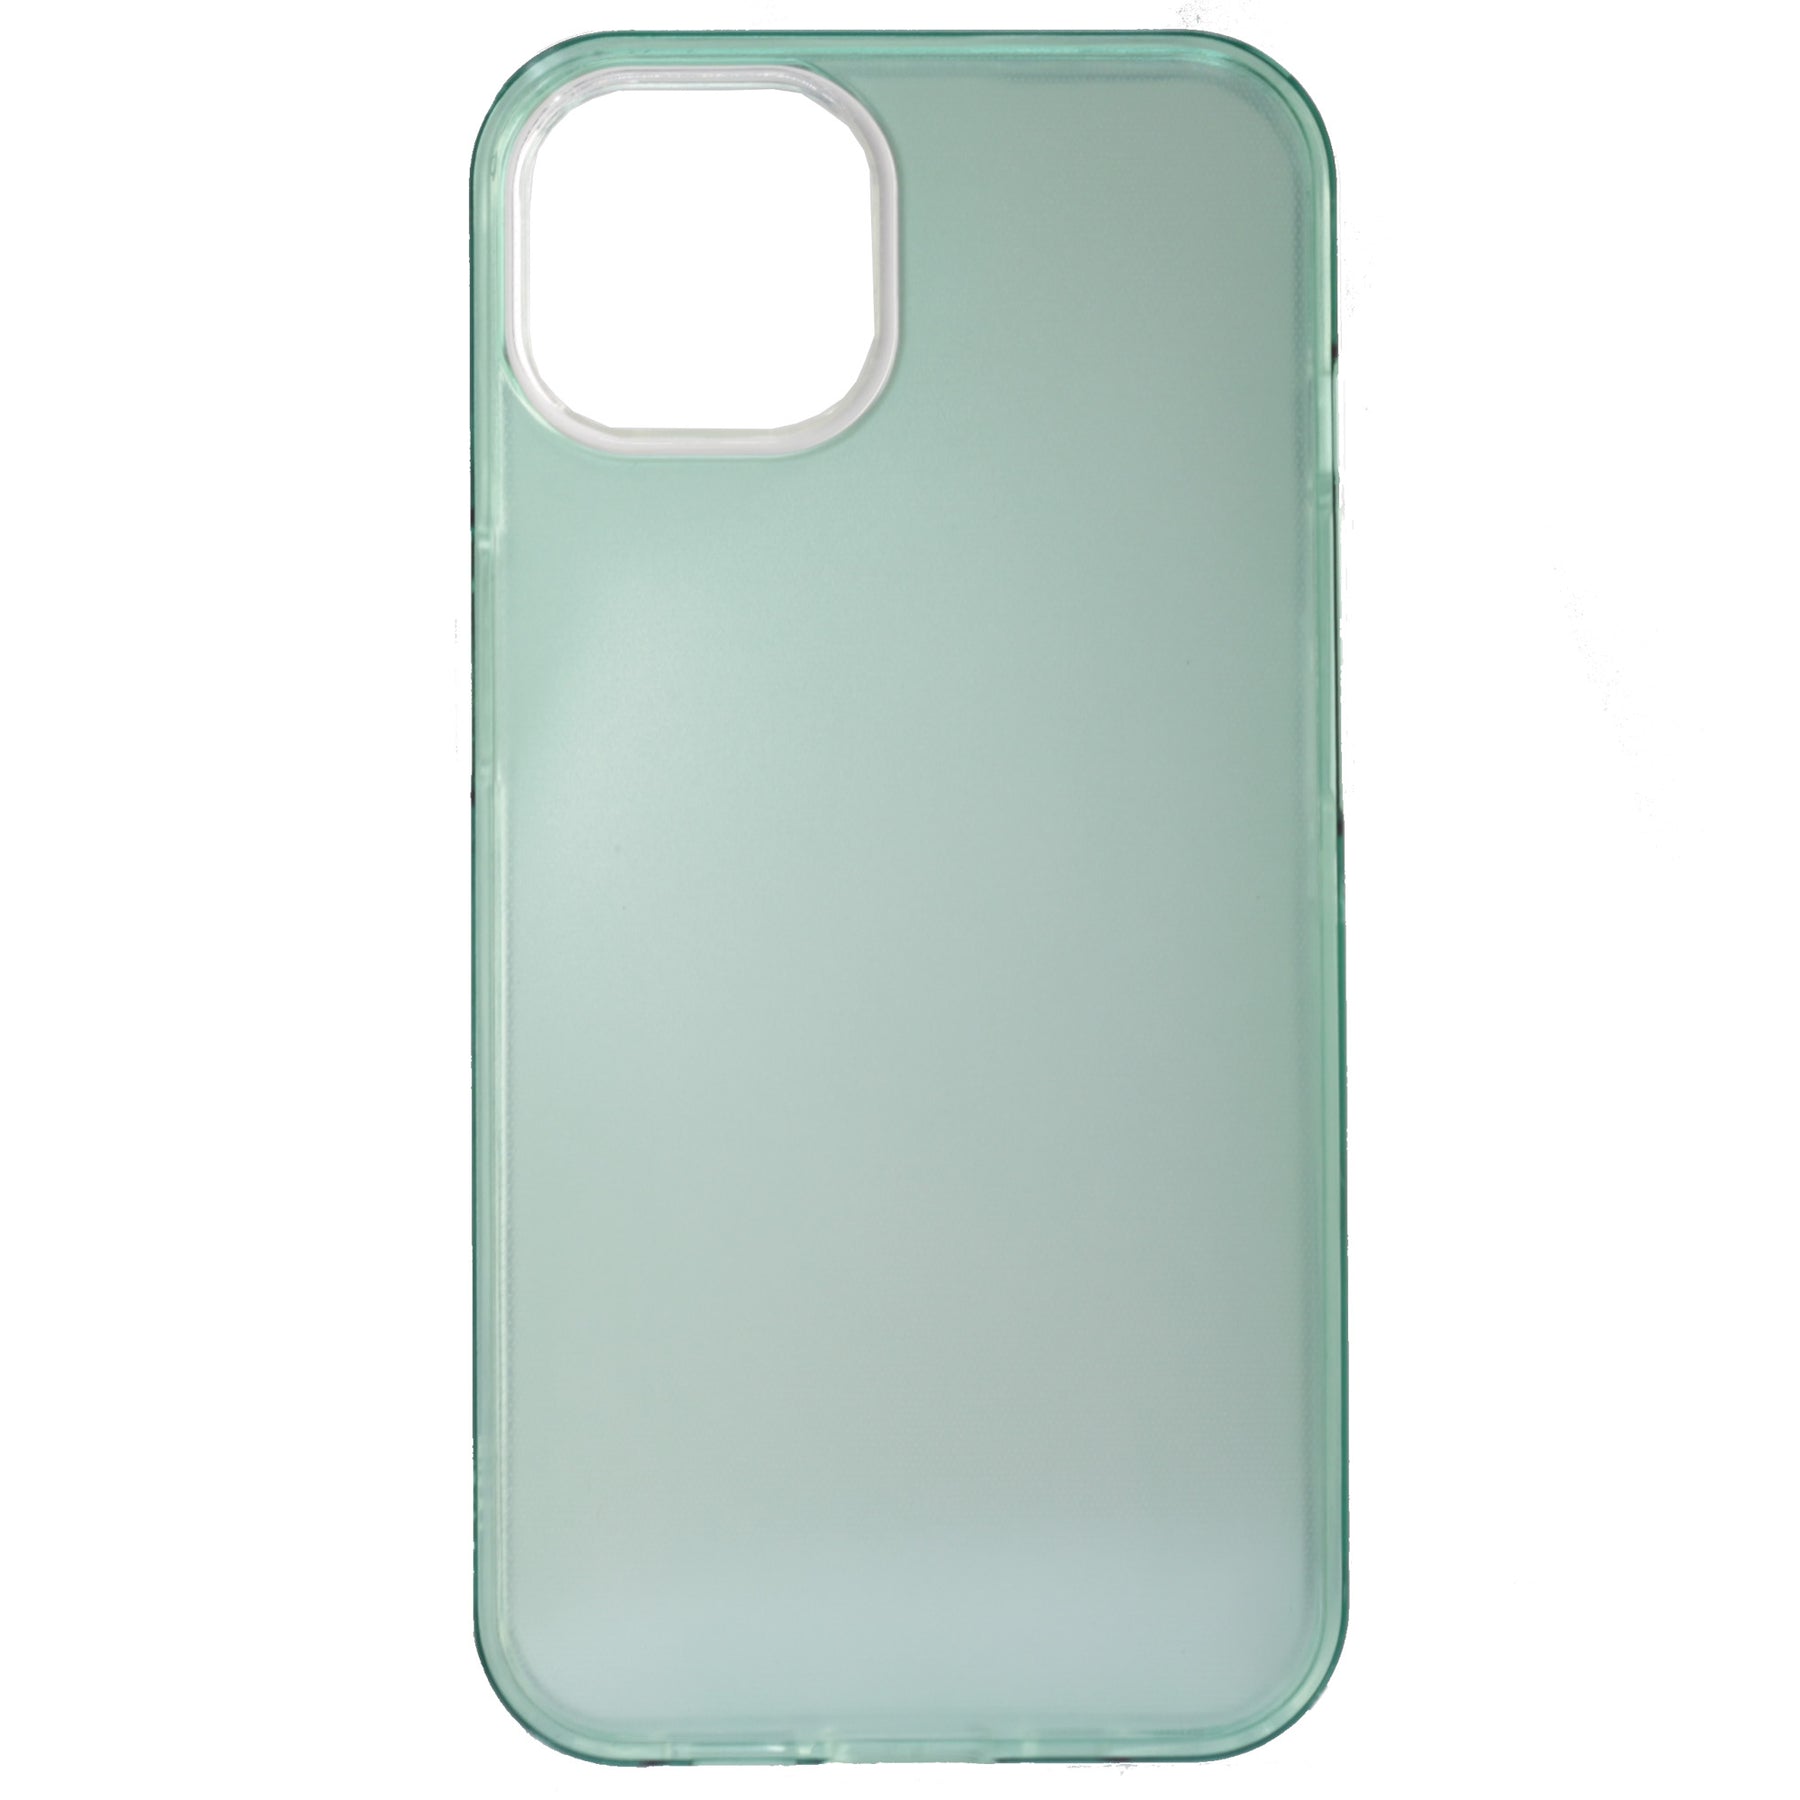 Apple iPhone 13 Pro Case, Double Sided Frosted Surface, Color Green.